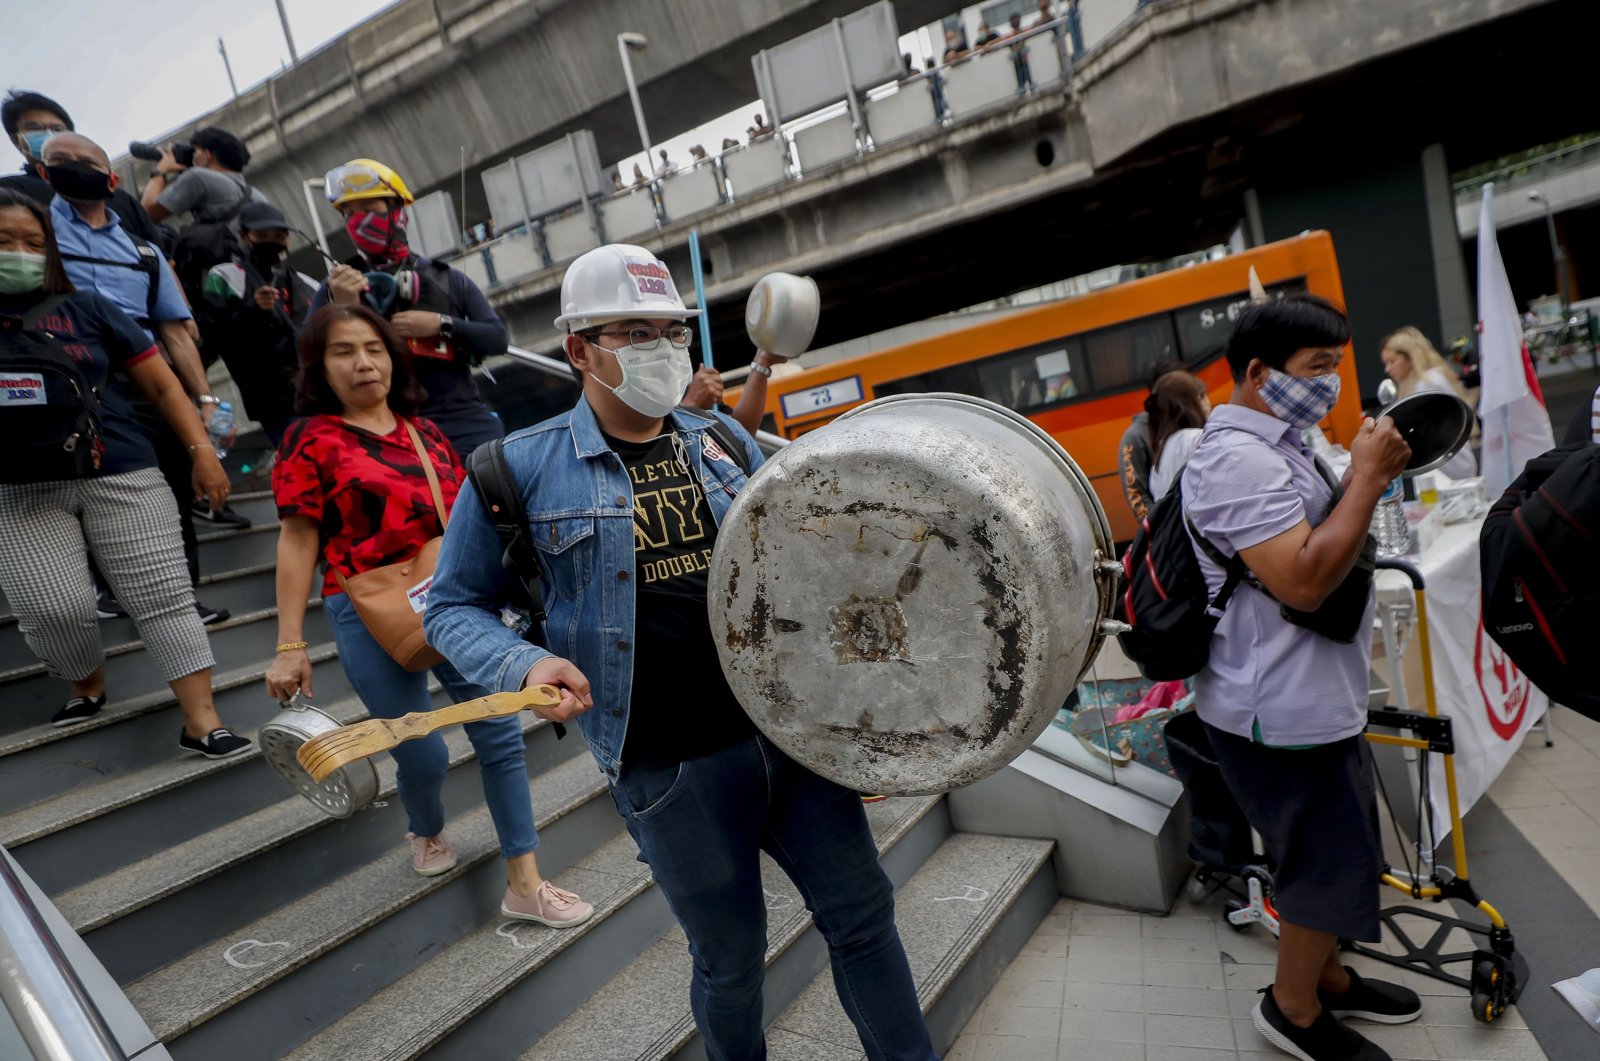 Pro-democracy protesters bang on pots and pans during a protest in Bangkok, Thailand, Feb. 10, 2021. (AP Photo)